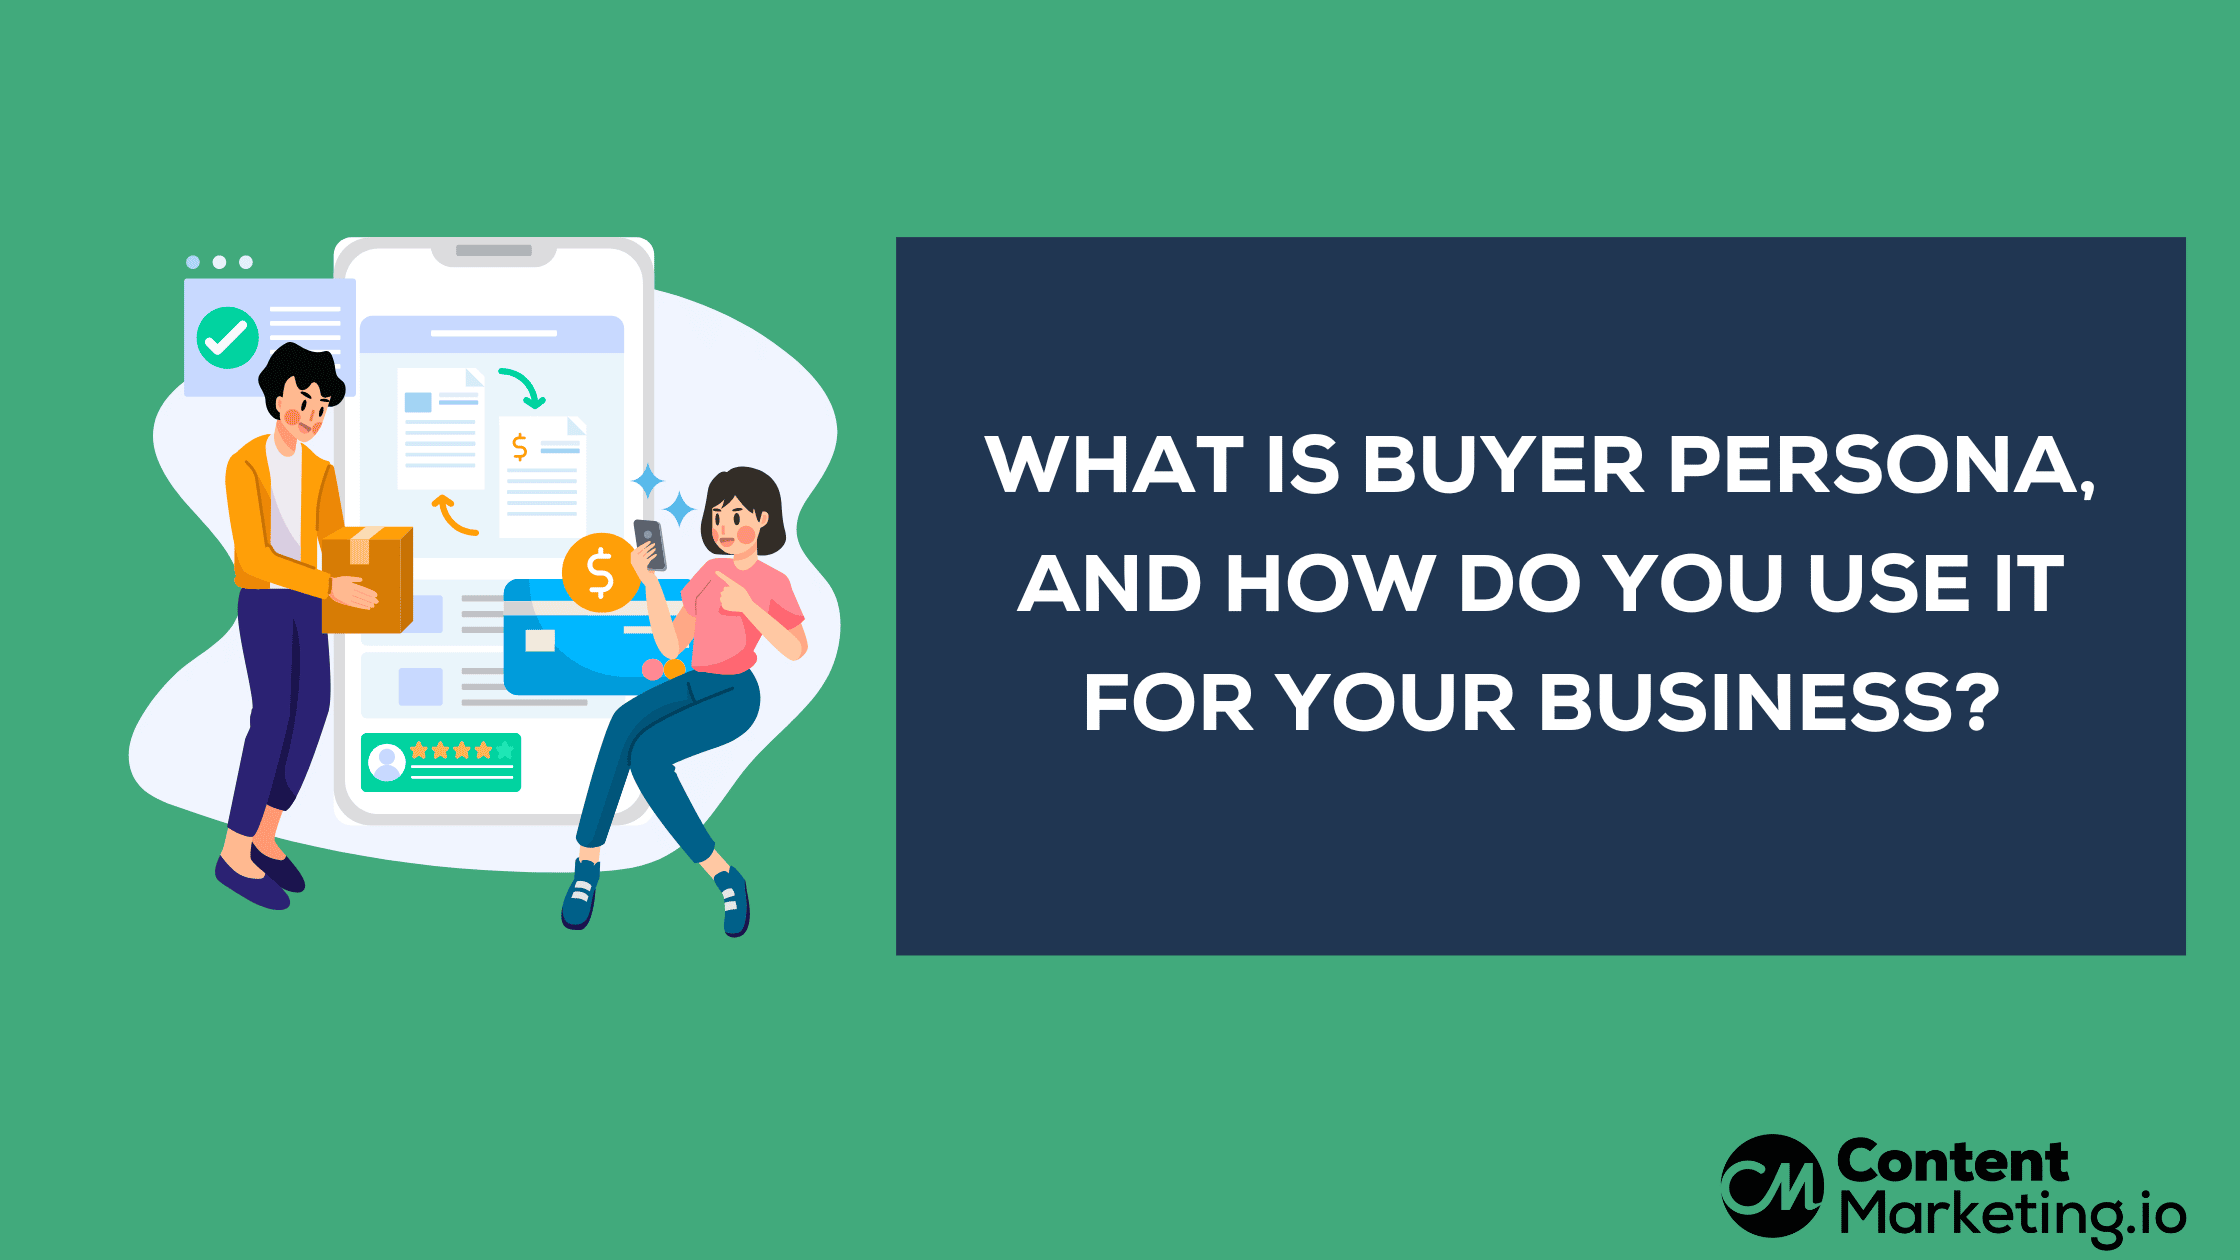 What Is Buyer Persona, and How Do You Use It for Your Business?